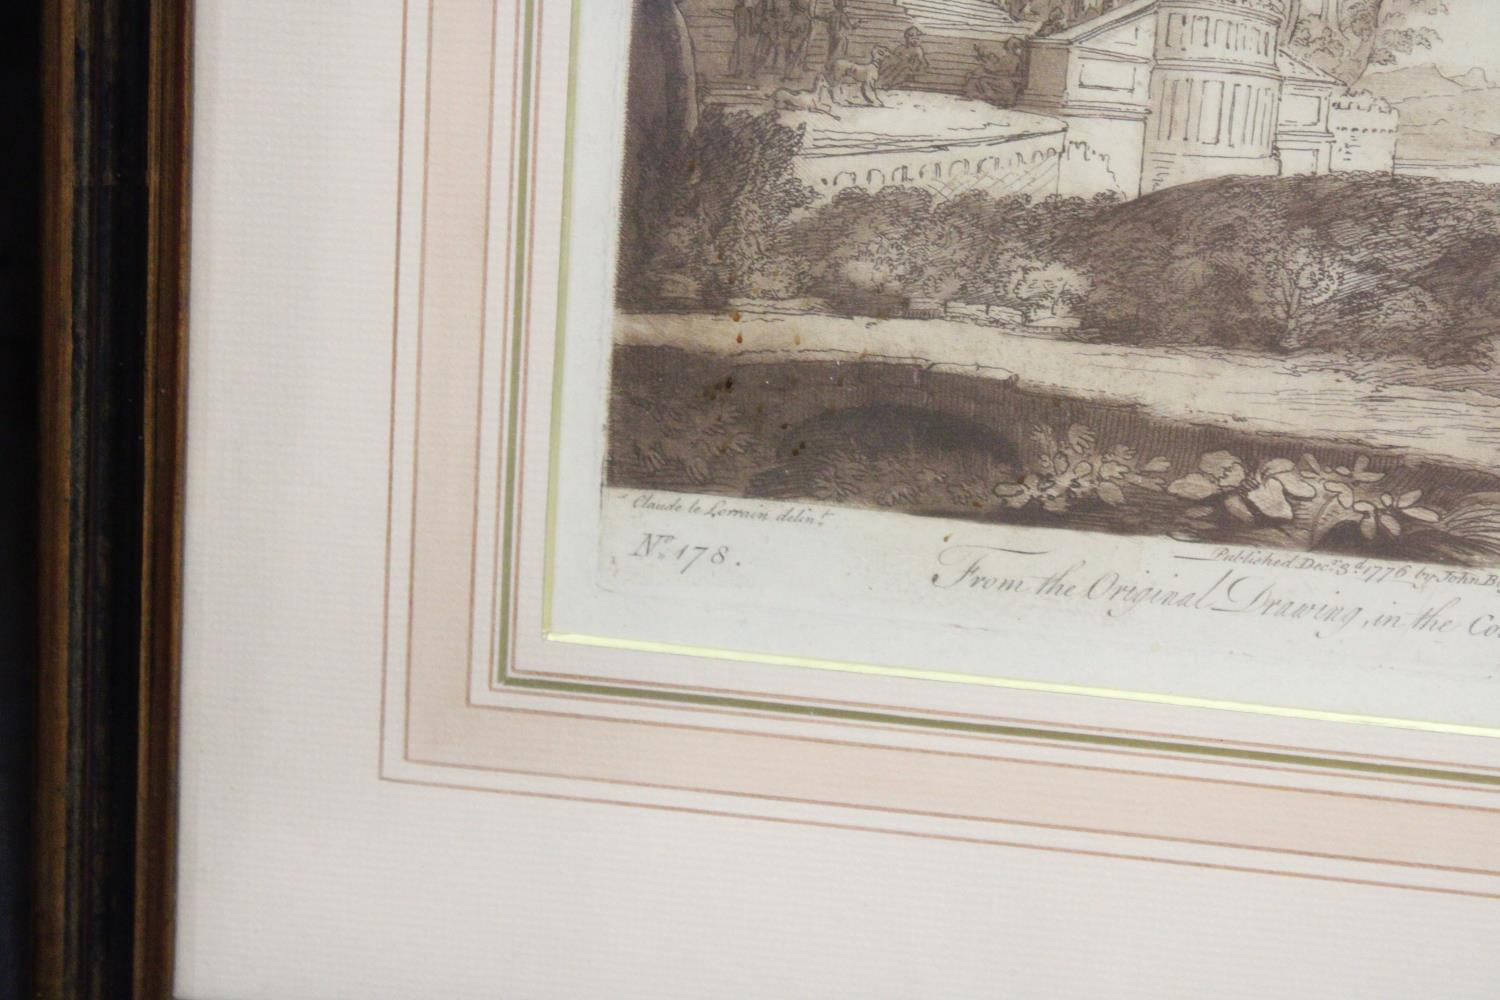 TWO VINTAGE FRAMED PRINTS TAKEN FROM THE ORIGINAL DRAWING, IN THE COLLECTION OF THE DUKE OF - Image 5 of 6